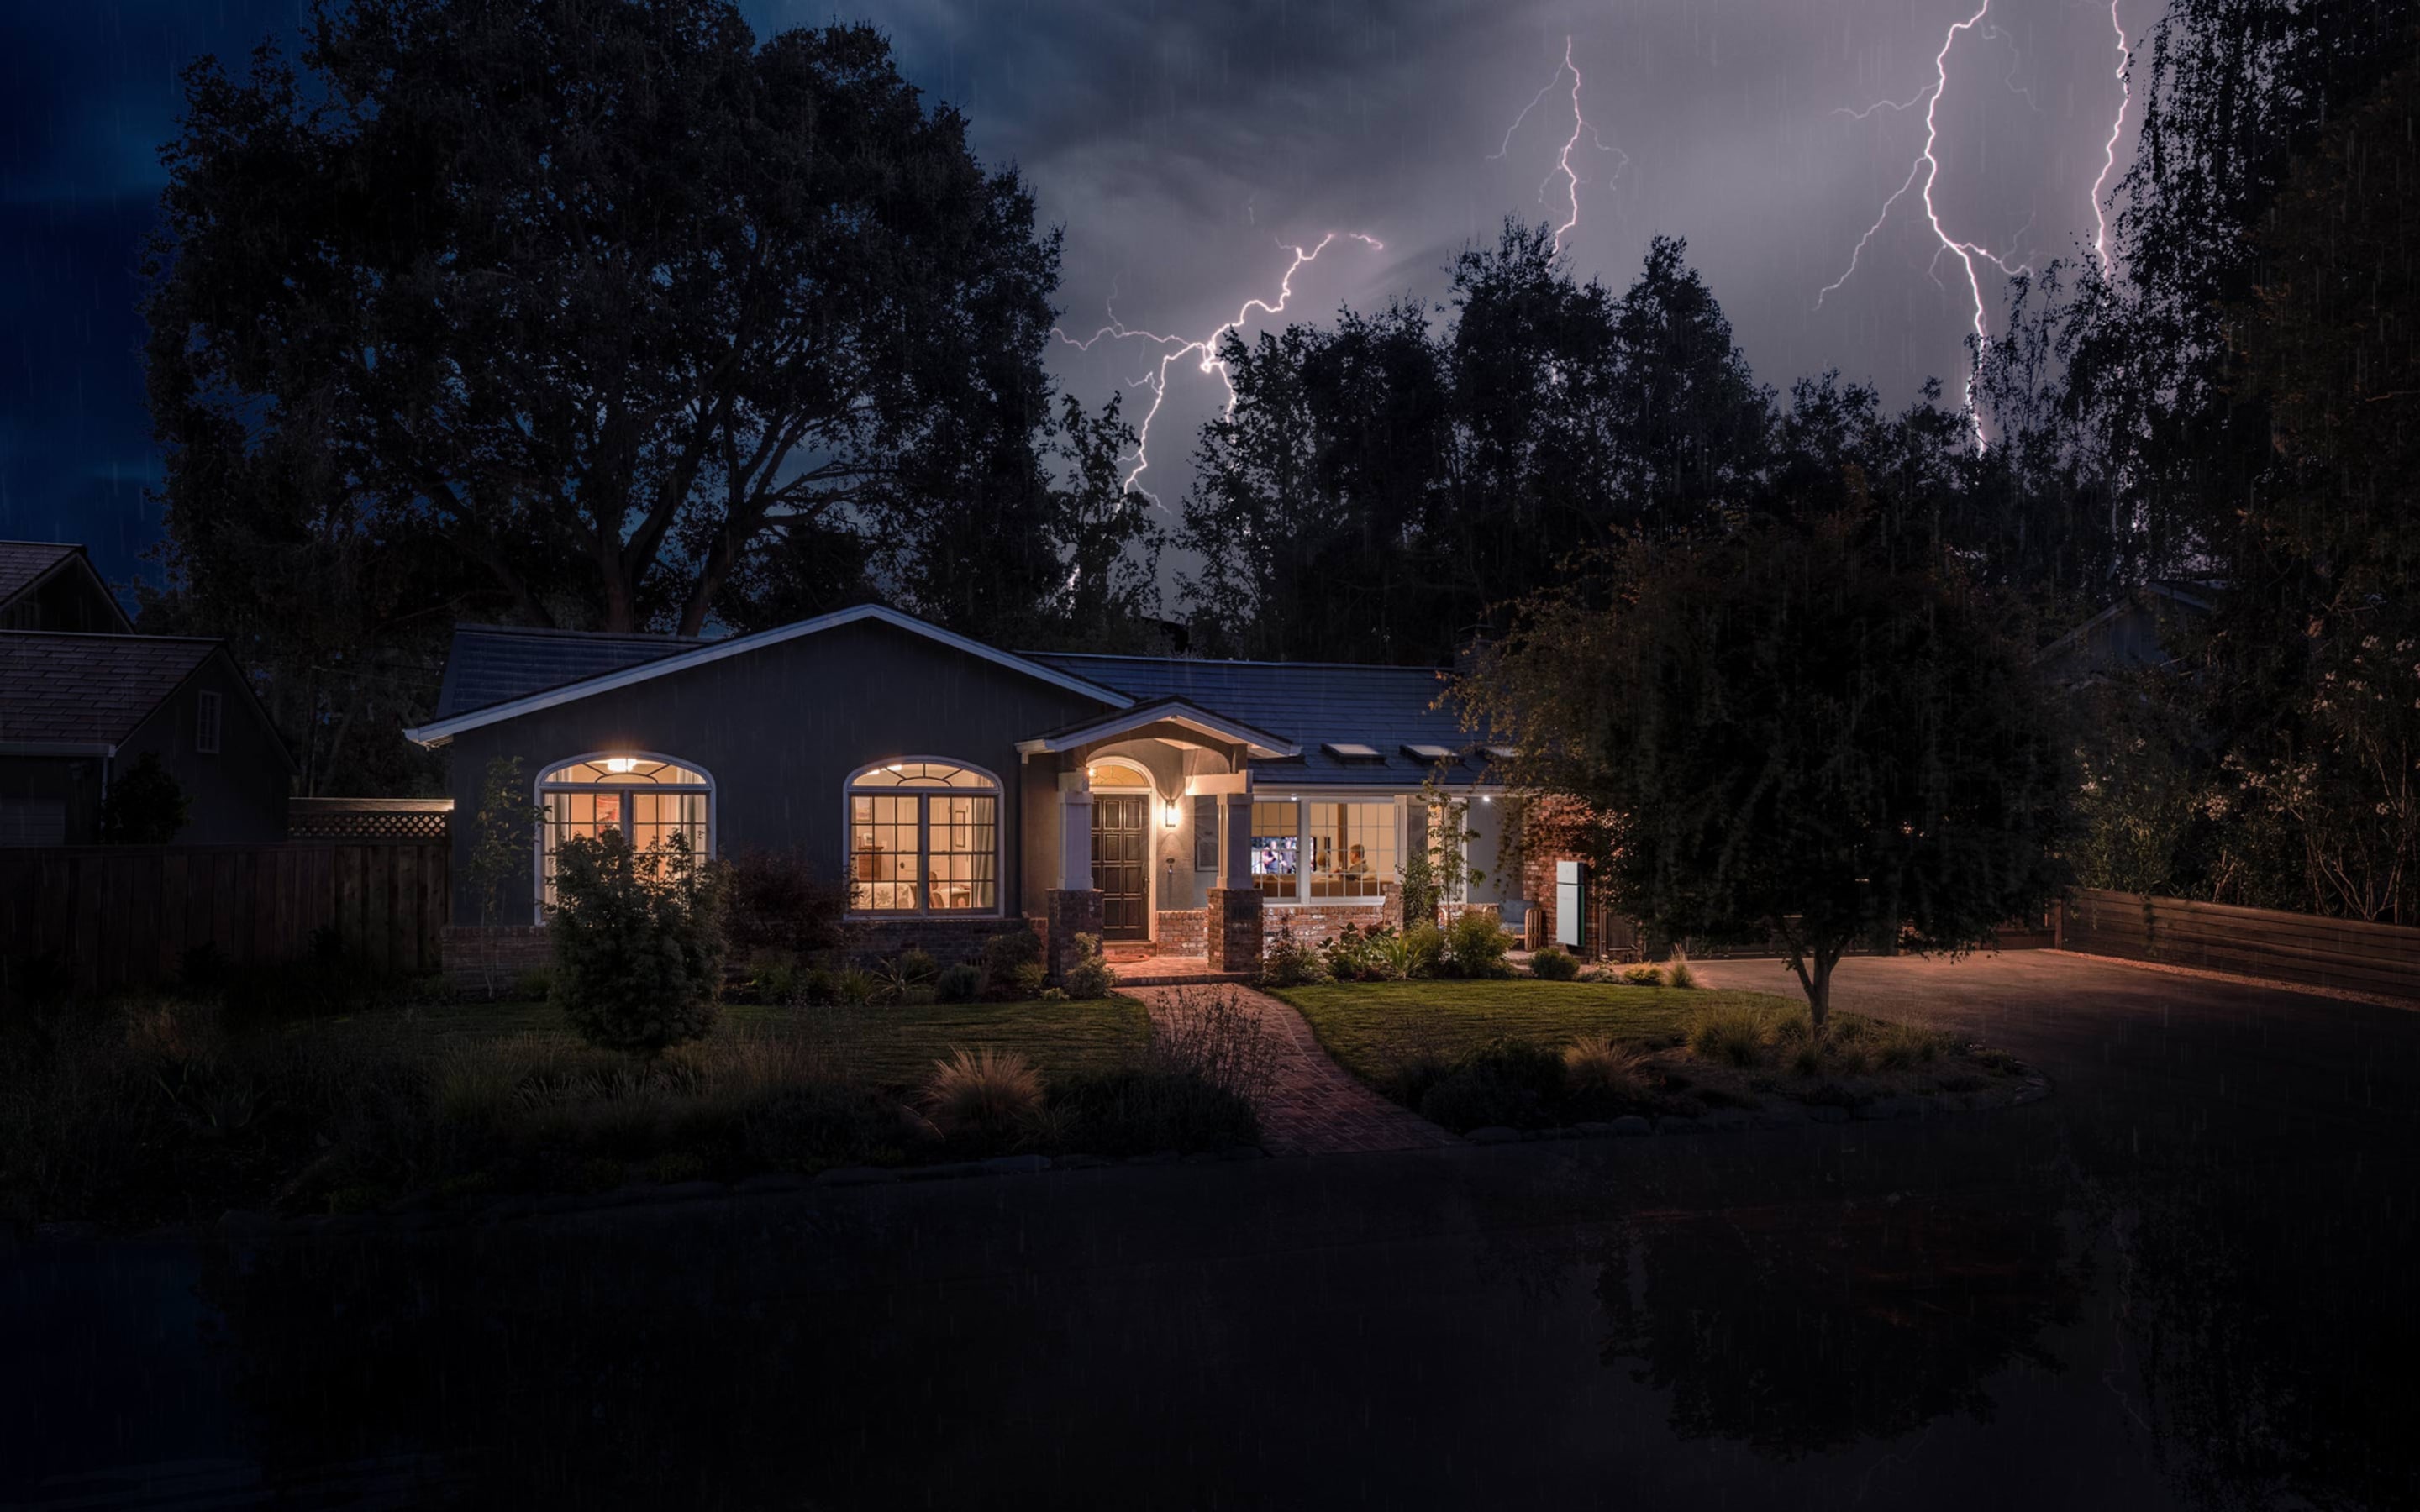 Home with Tesla Solar Roof and Powerwall in a storm